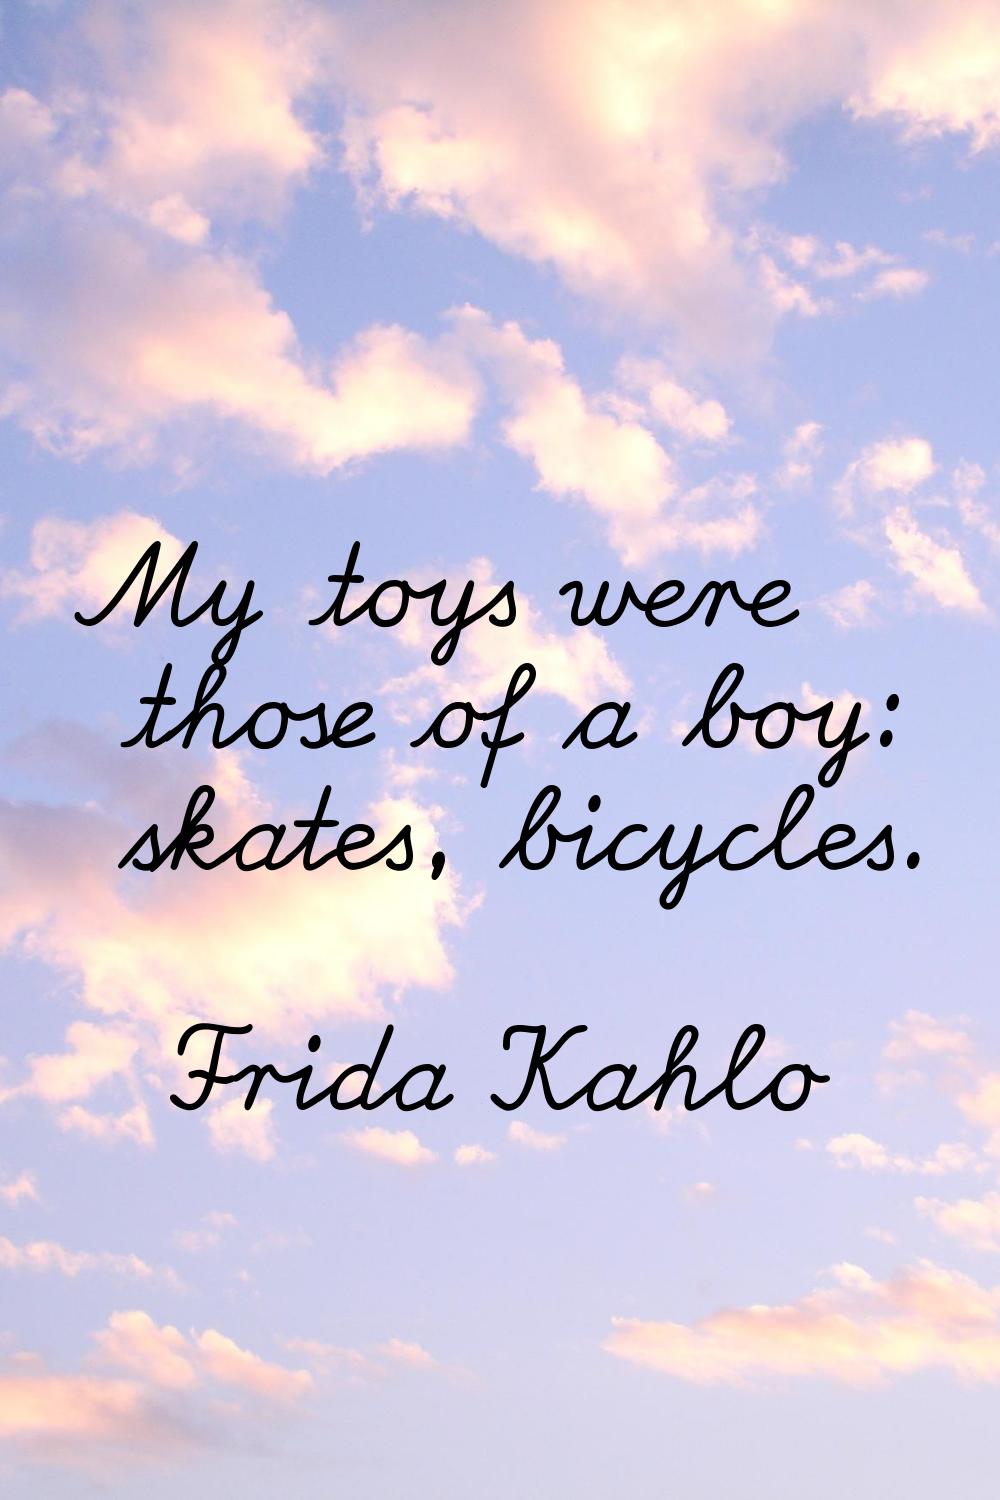 My toys were those of a boy: skates, bicycles.